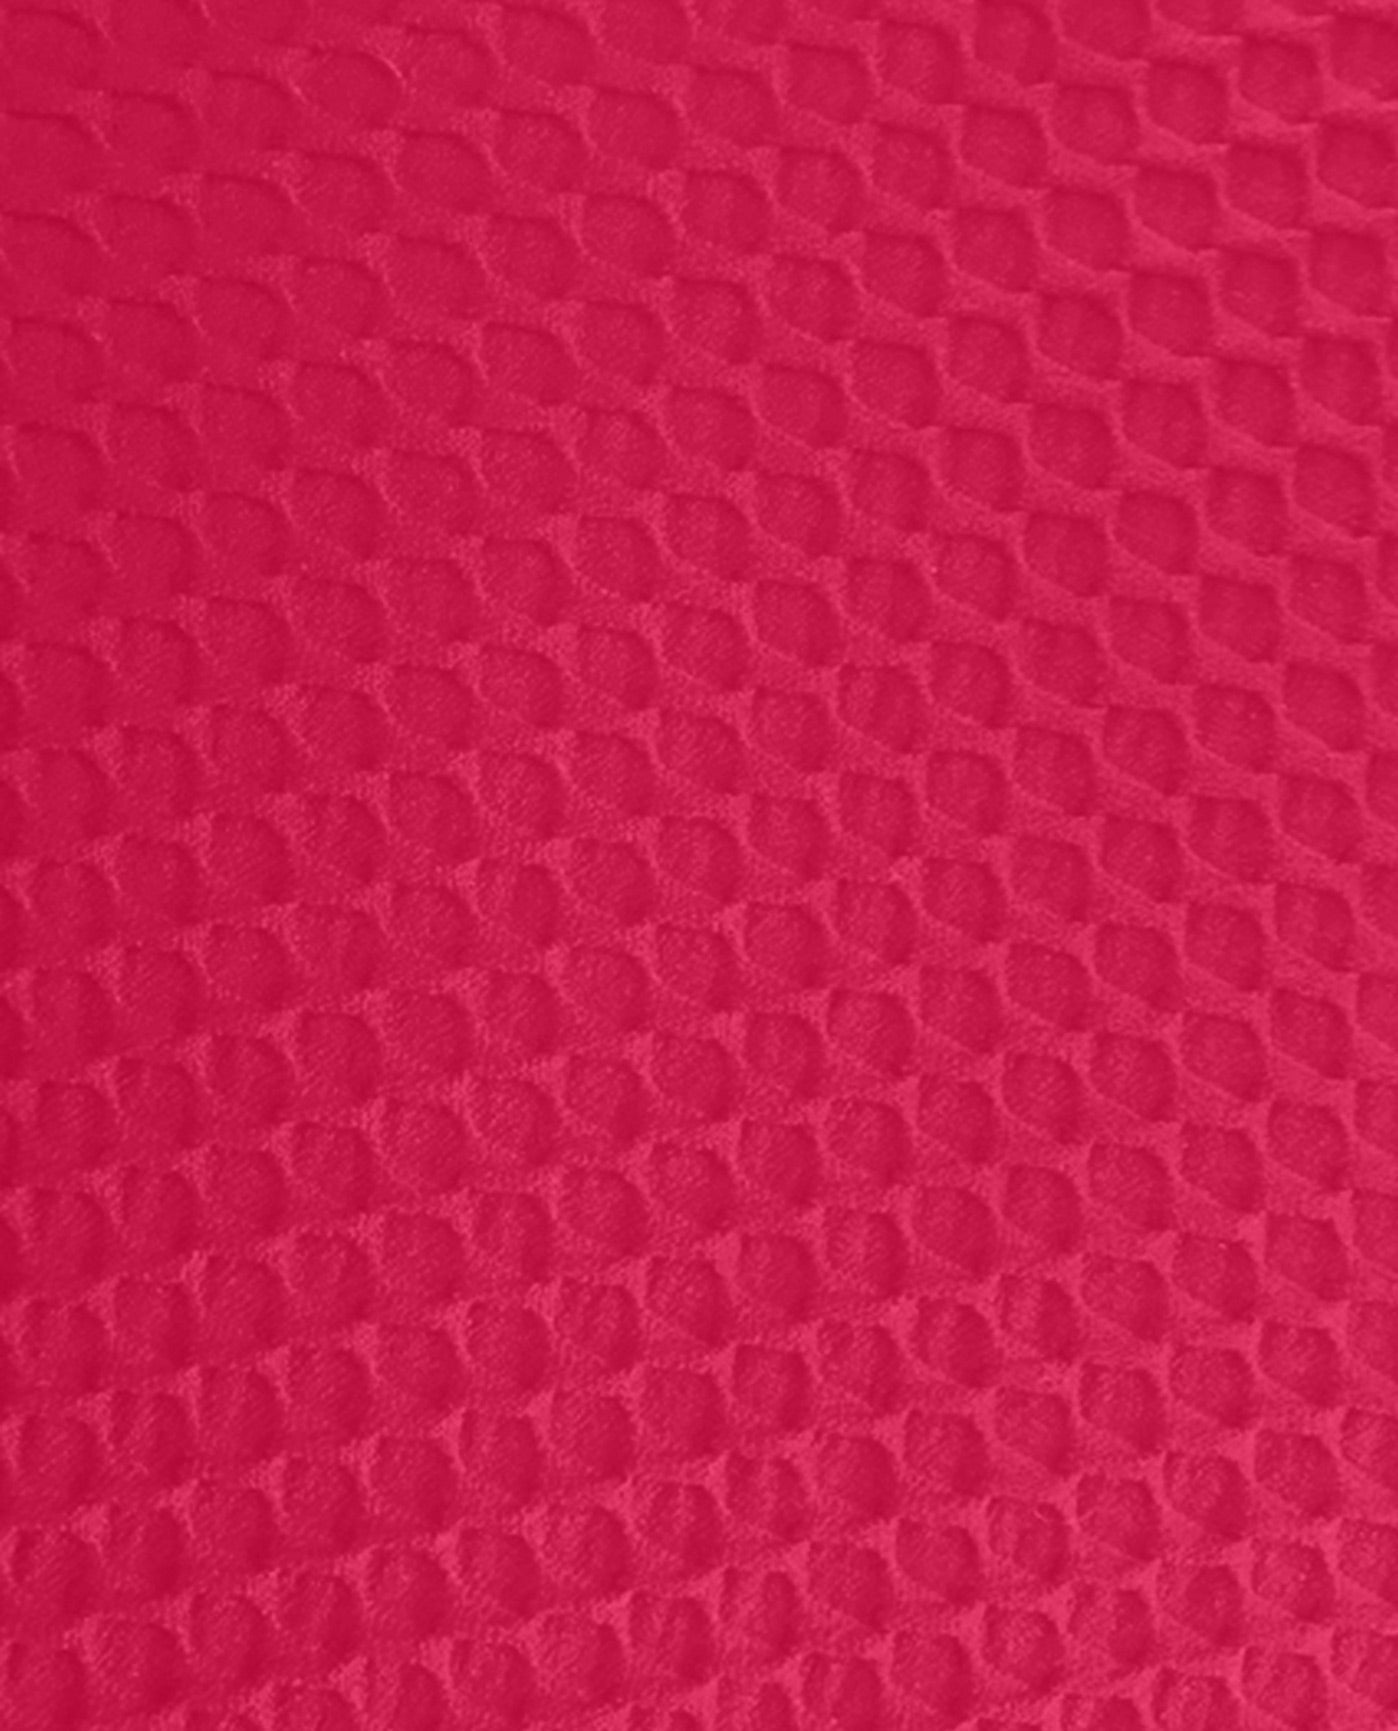 FABRIC SWATCH VIEW OF CHLORINE RESISTANT AQUAMORE SOLID TEXTURED HIGH NECK PLUS SIZE SWIMSUIT | 511 AQT TEXTURED RASPBERRY